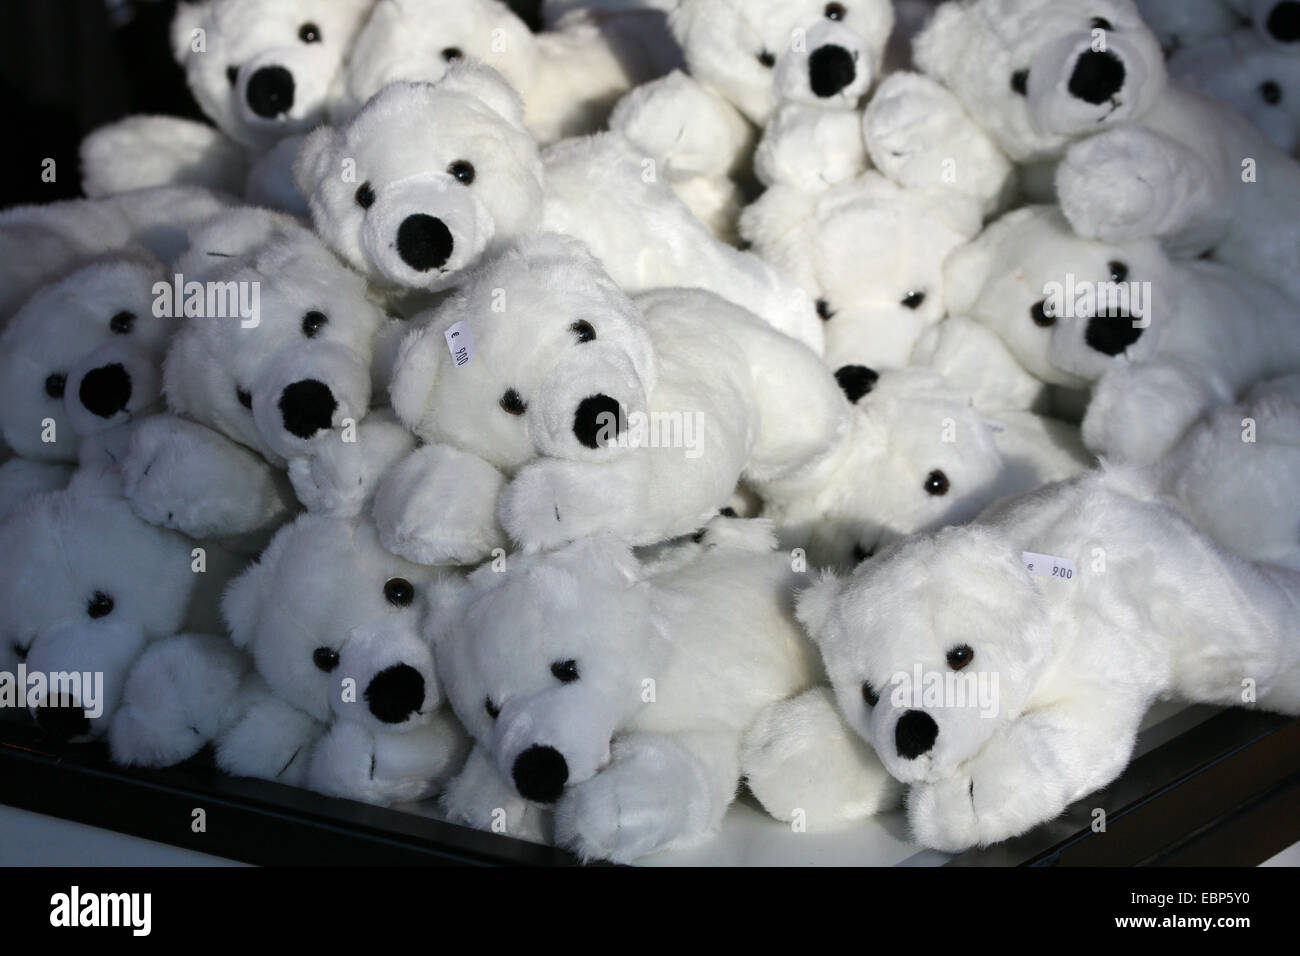 Plush toys depicted famous Knut the Polar Bear in a souvenir shop at Berlin Zoo, Germany. Stock Photo